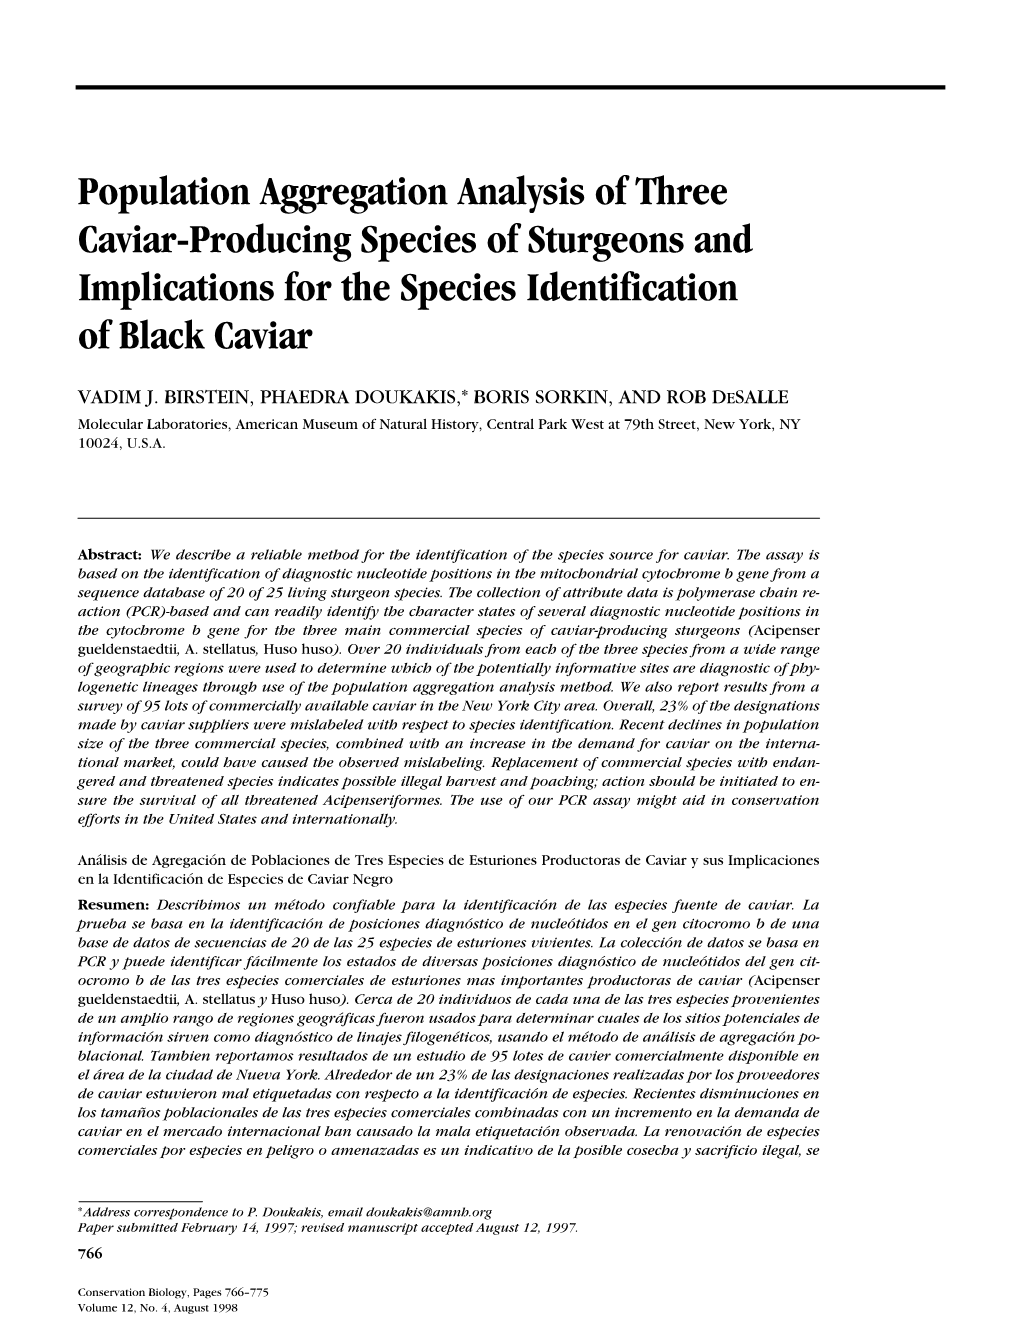 Population Aggregation Analysis of Three Caviar-Producing Species of Sturgeons and Implications for the Species Identification of Black Caviar